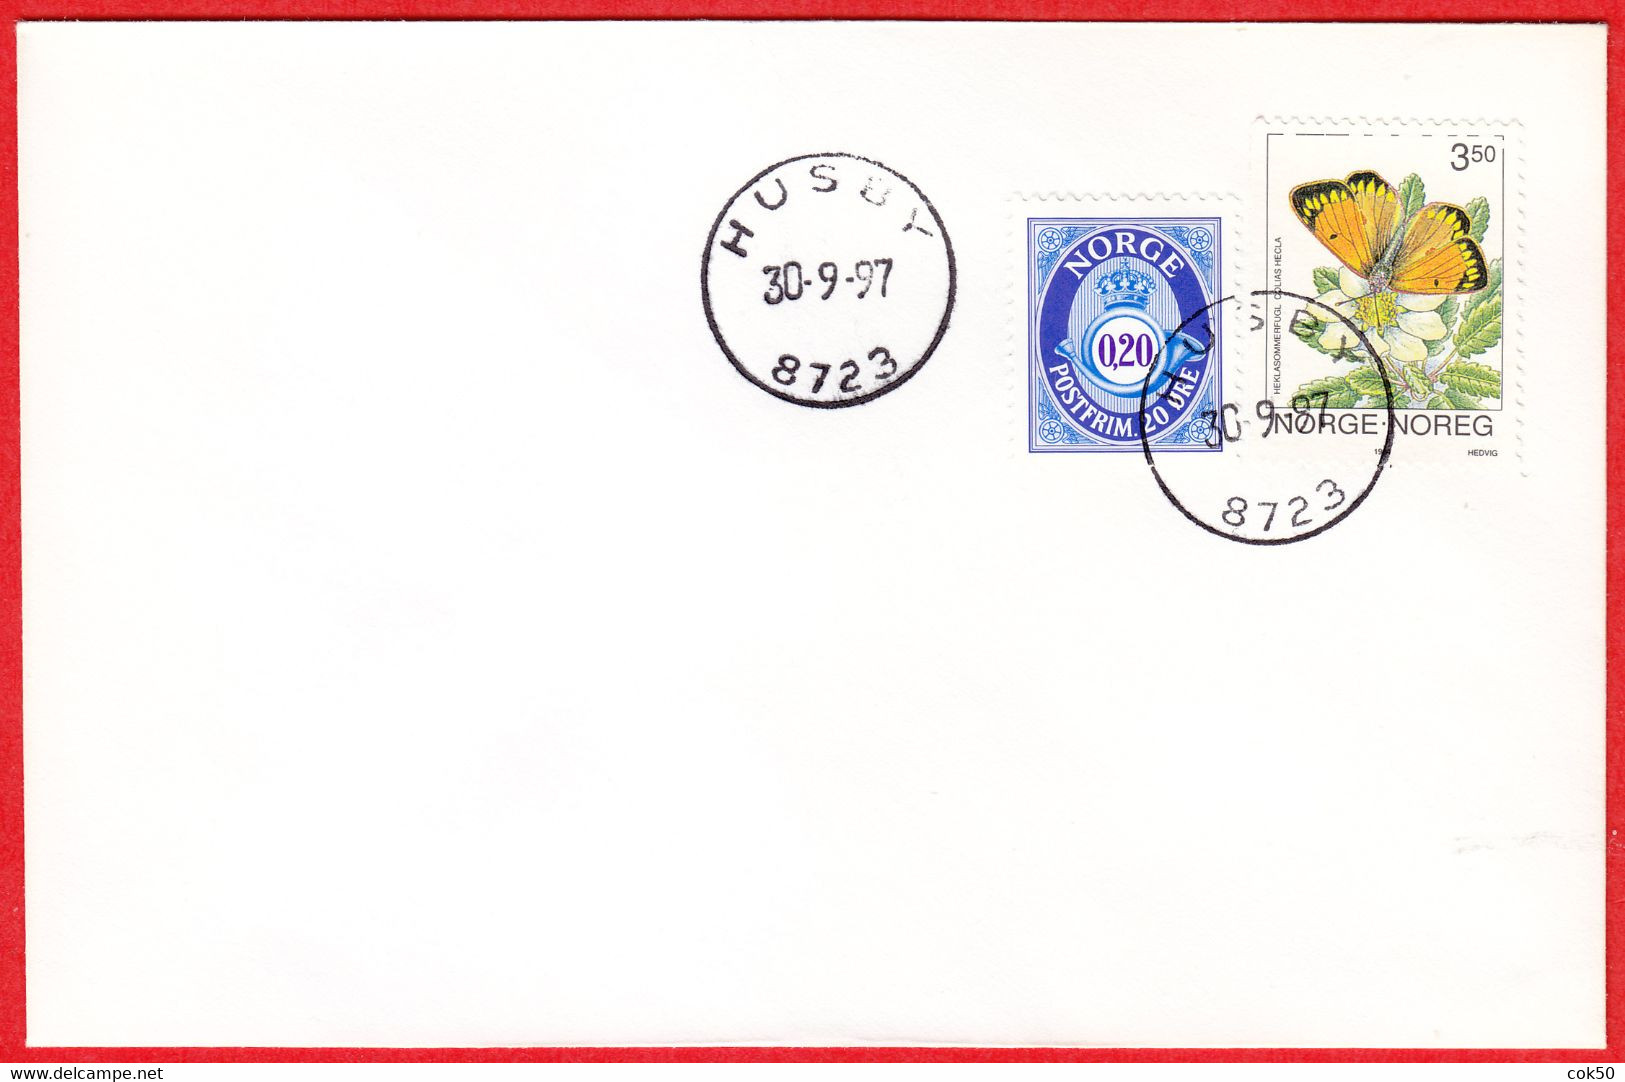 NORWAY -  8723 HUSBY - (Nordland County) - Last Day/postoffice Closed On 1997.09.30 - Local Post Stamps